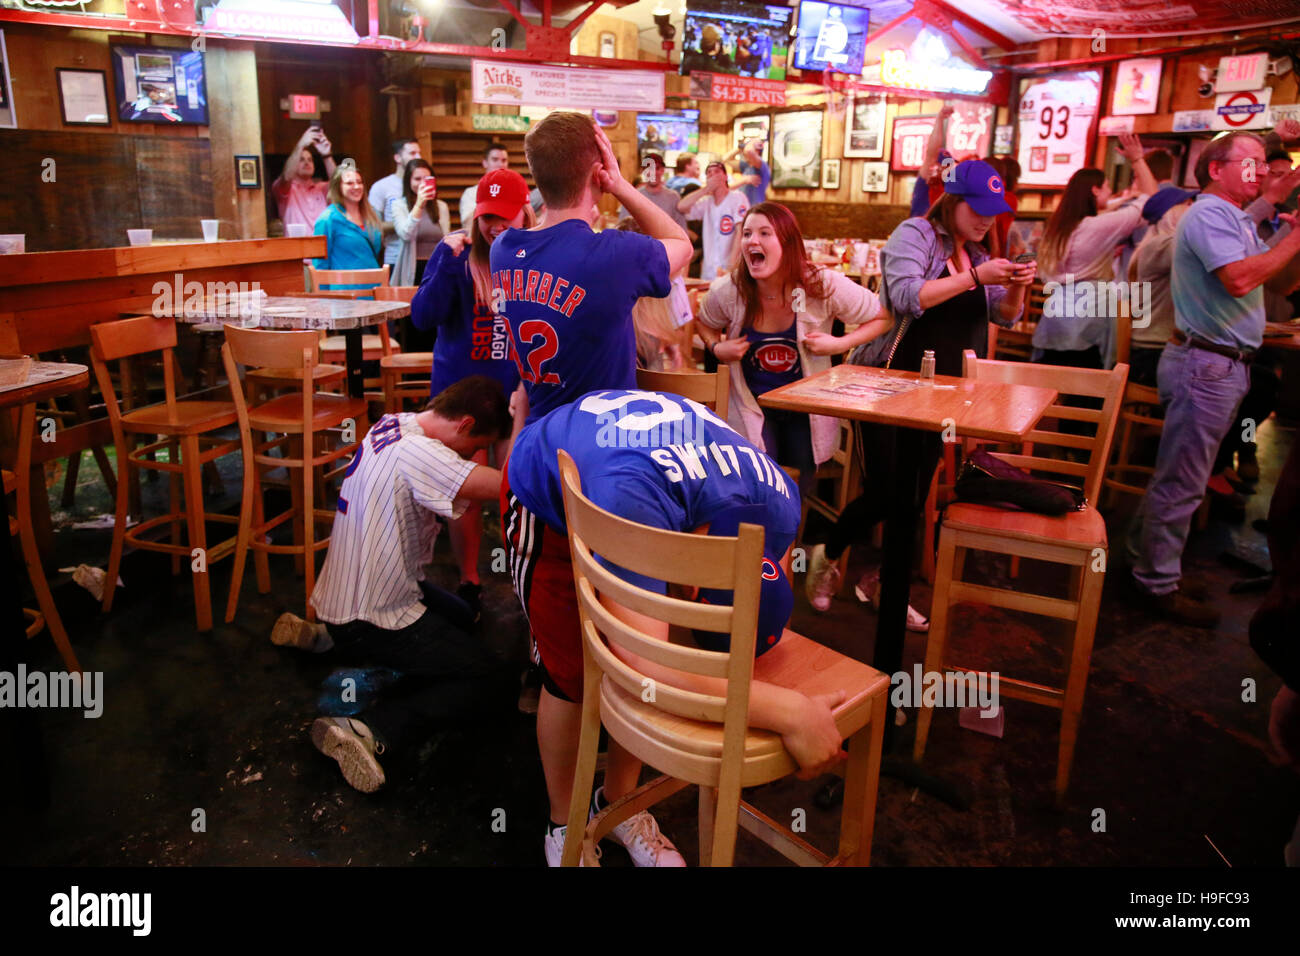 November 2, 2016 - Bloomington, Indiana, USA: Chicago Cubs fans celebrate at Nick's English Hut after the baseball team won the World Series against the Cleveland Indians breaking a 108 year old curse. The Chicago Cubs last won the world series in 1908. Stock Photo